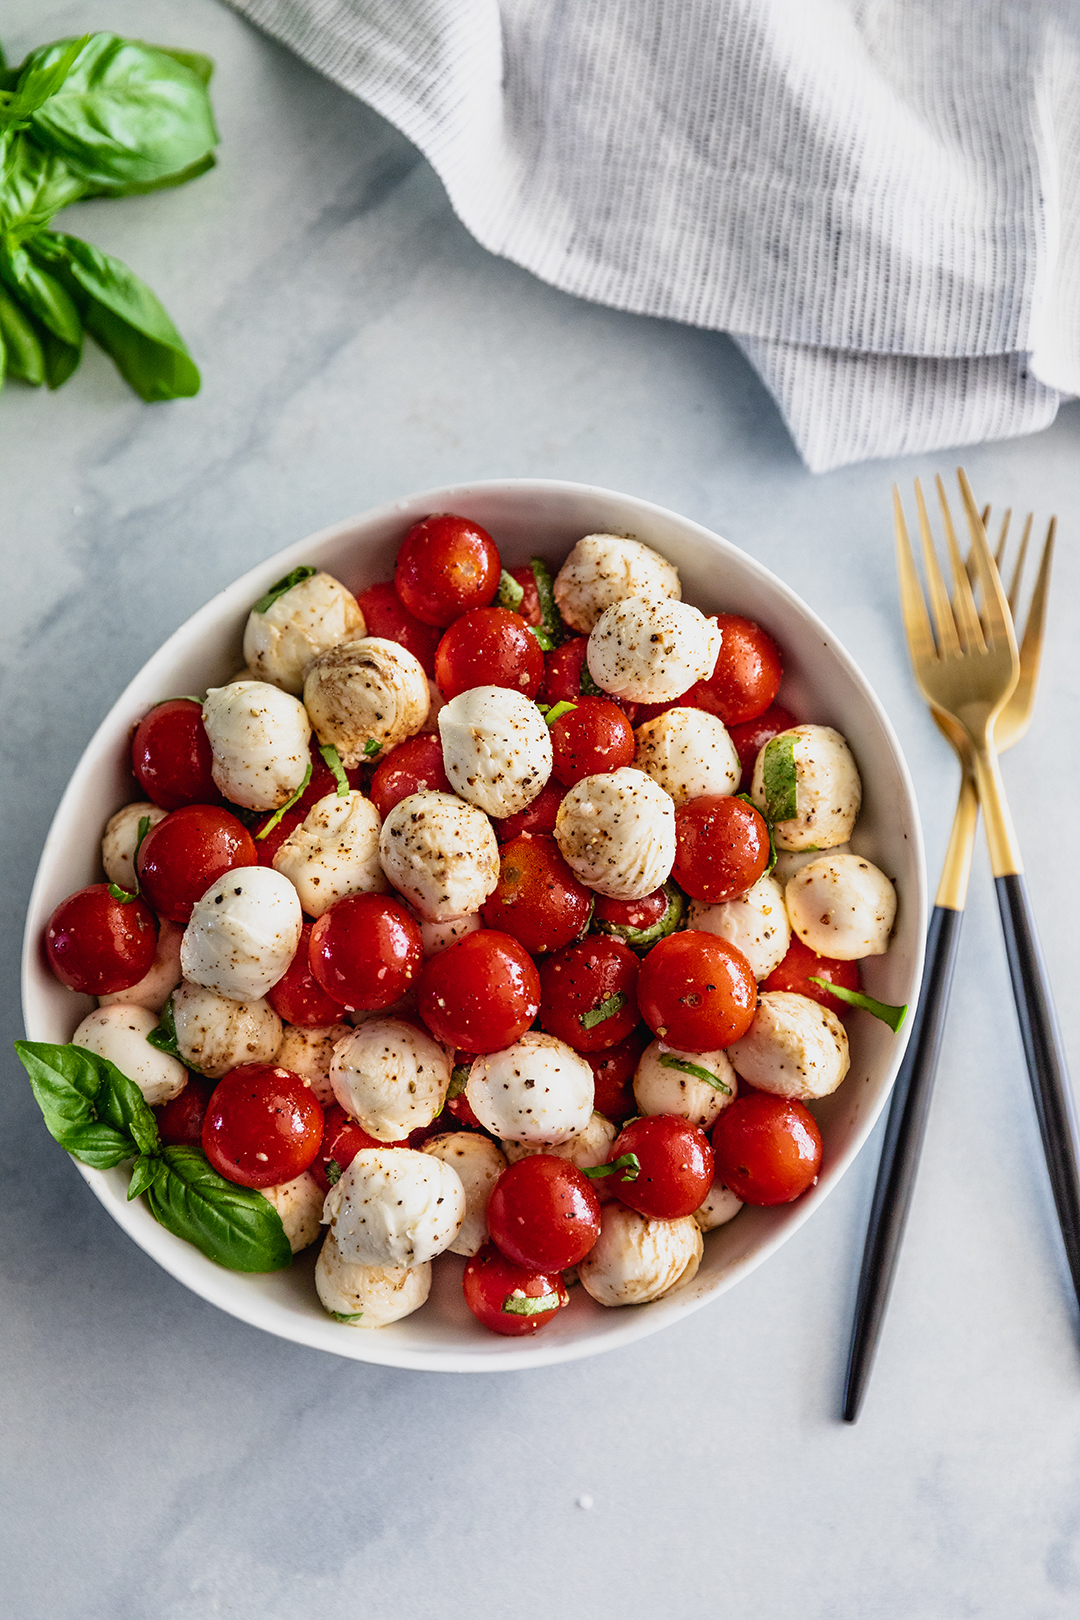 Make Ahead Caprese Salad with Cherry Tomatoes - No. 2 Pencil